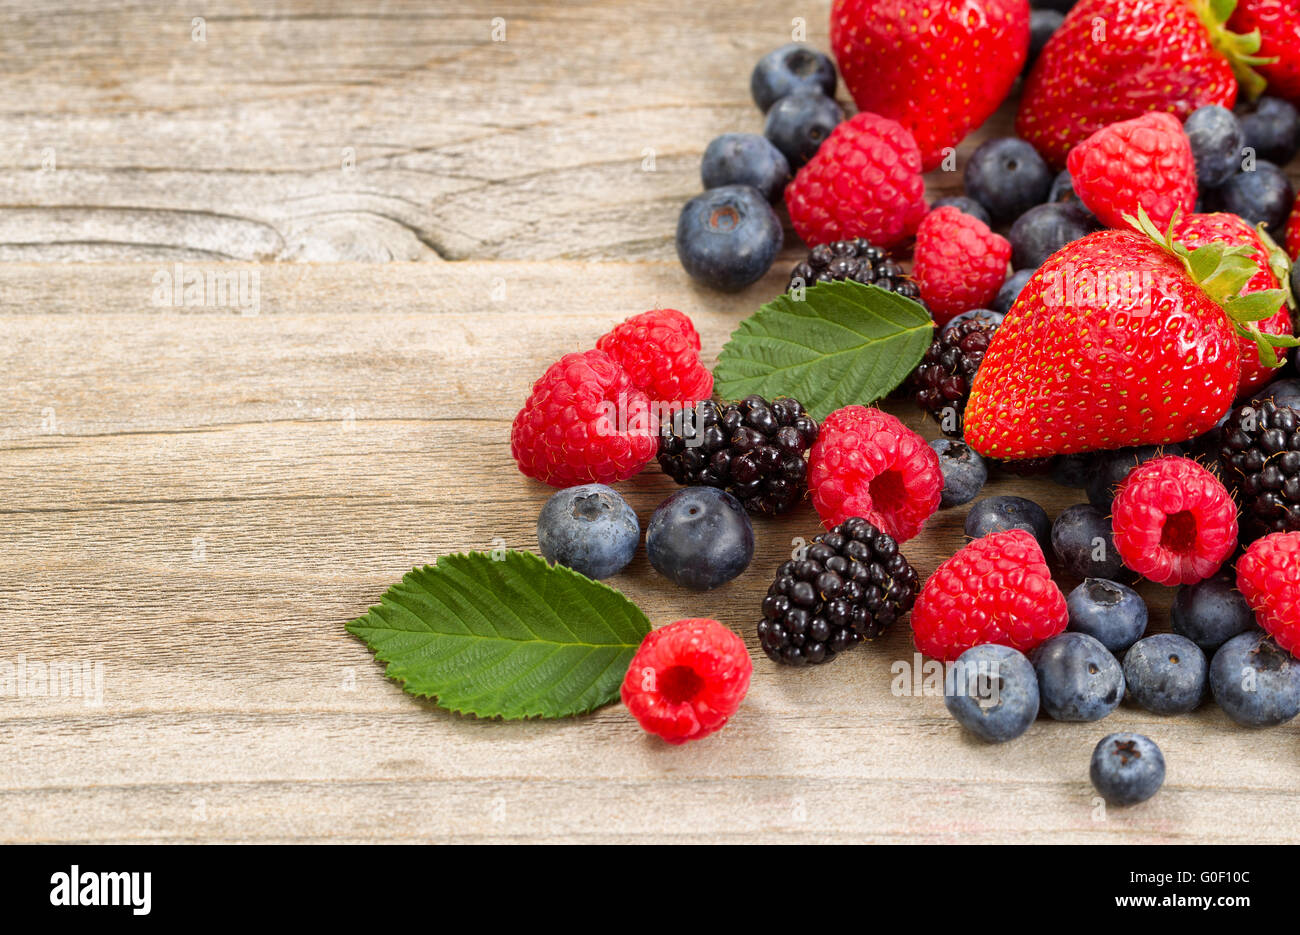 Freshly picked berries on rustic wooden boards Stock Photo